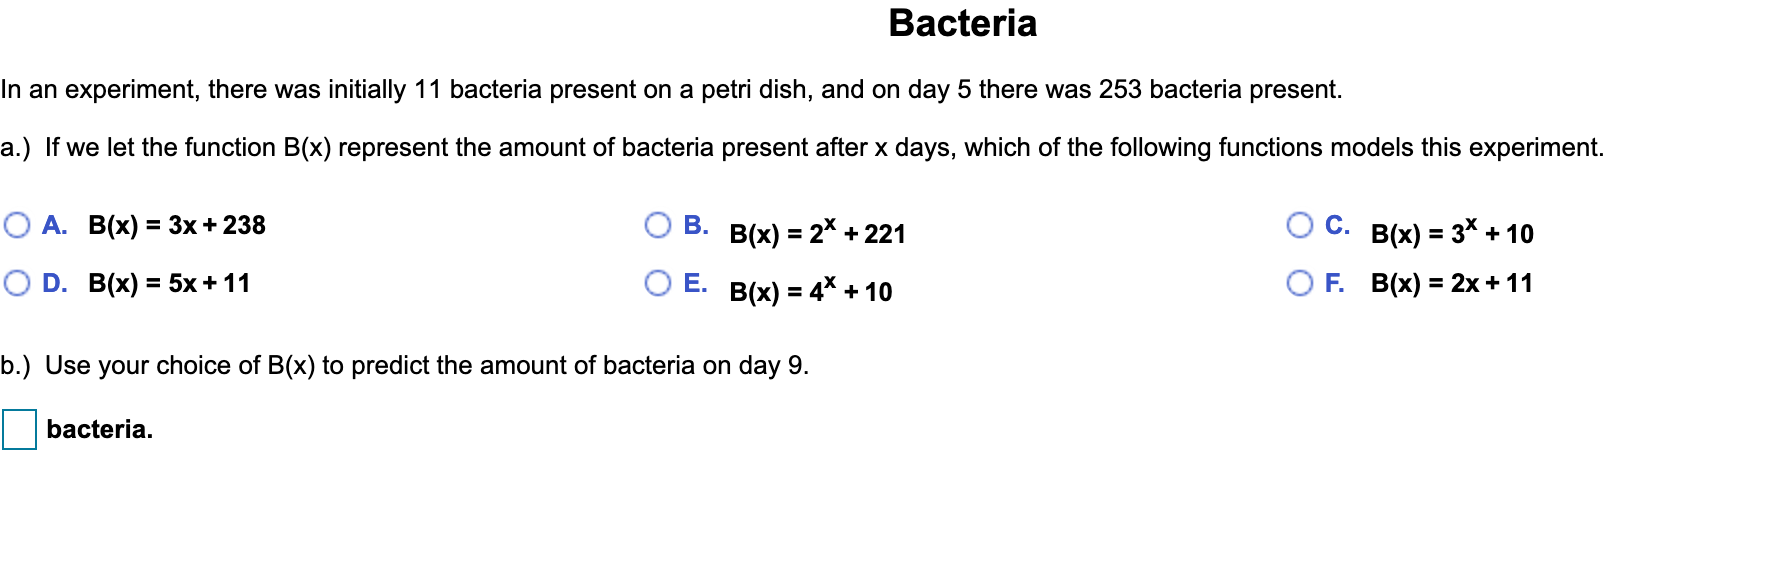 Bacteria
n an experiment, there was initially 11 bacteria present on a petri dish, and on day 5 there was 253 bacteria present.
a.) If we let the function B(x) represent the amount of bacteria present after x days, which of the following functions models this experiment.
О А. В(x) %3 3х + 238
В.
B(x) = 2* + 221
Ос.
B(x) = 3* + 10
%3D
O D. B(x) %3D5х+ 11
OE.
B(x) = 4* + 10
F. В(x) %3D 2x + 11
p.) Use your choice of B(x) to predict the amount of bacteria on day 9.
bacteria.
